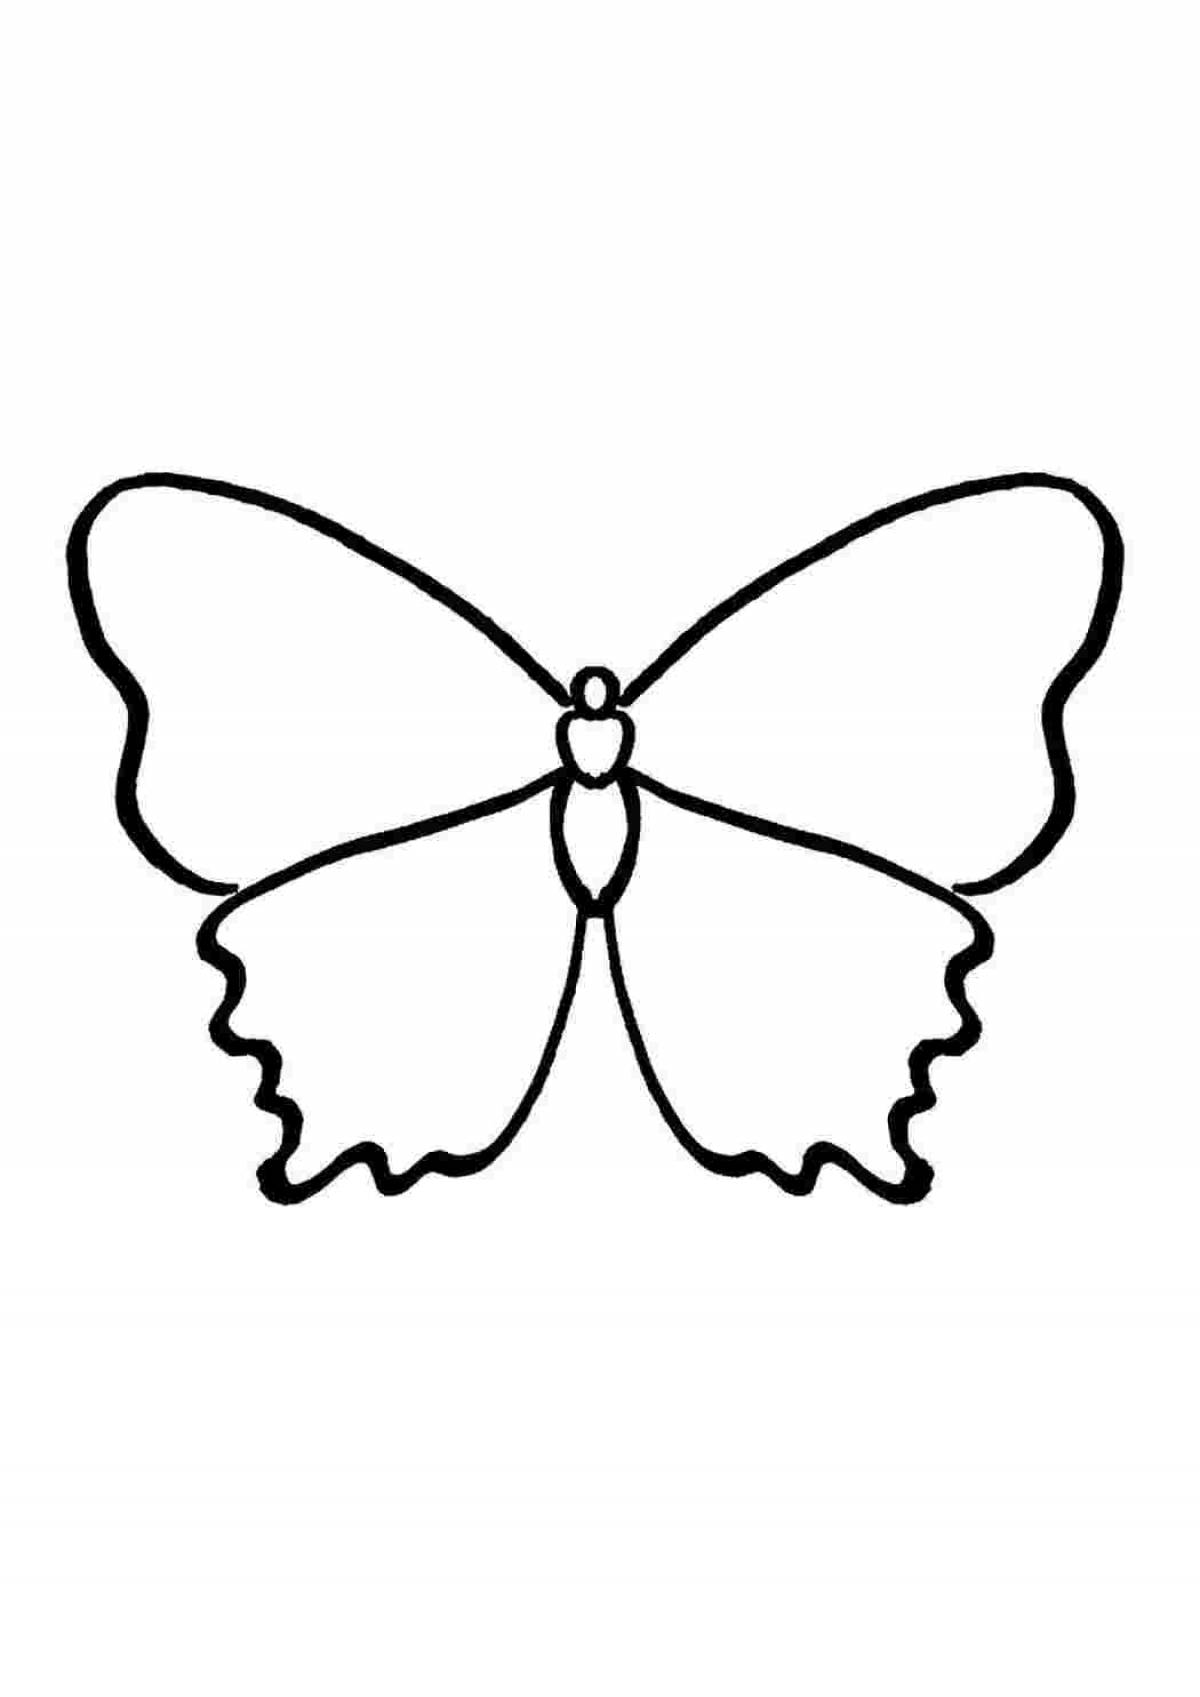 Greatly colored butterflies coloring page